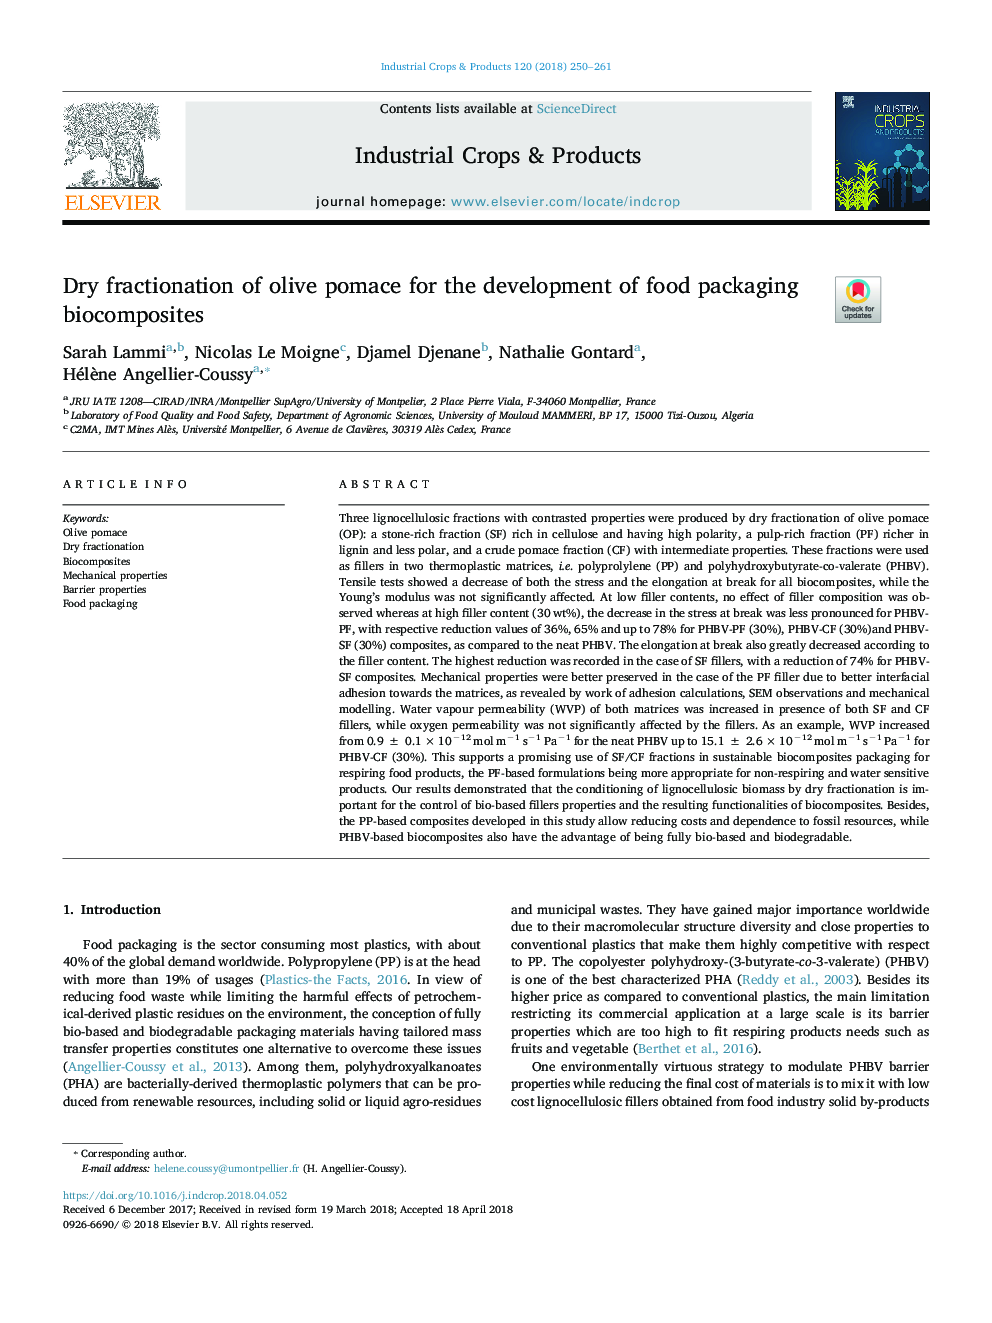 Dry fractionation of olive pomace for the development of food packaging biocomposites